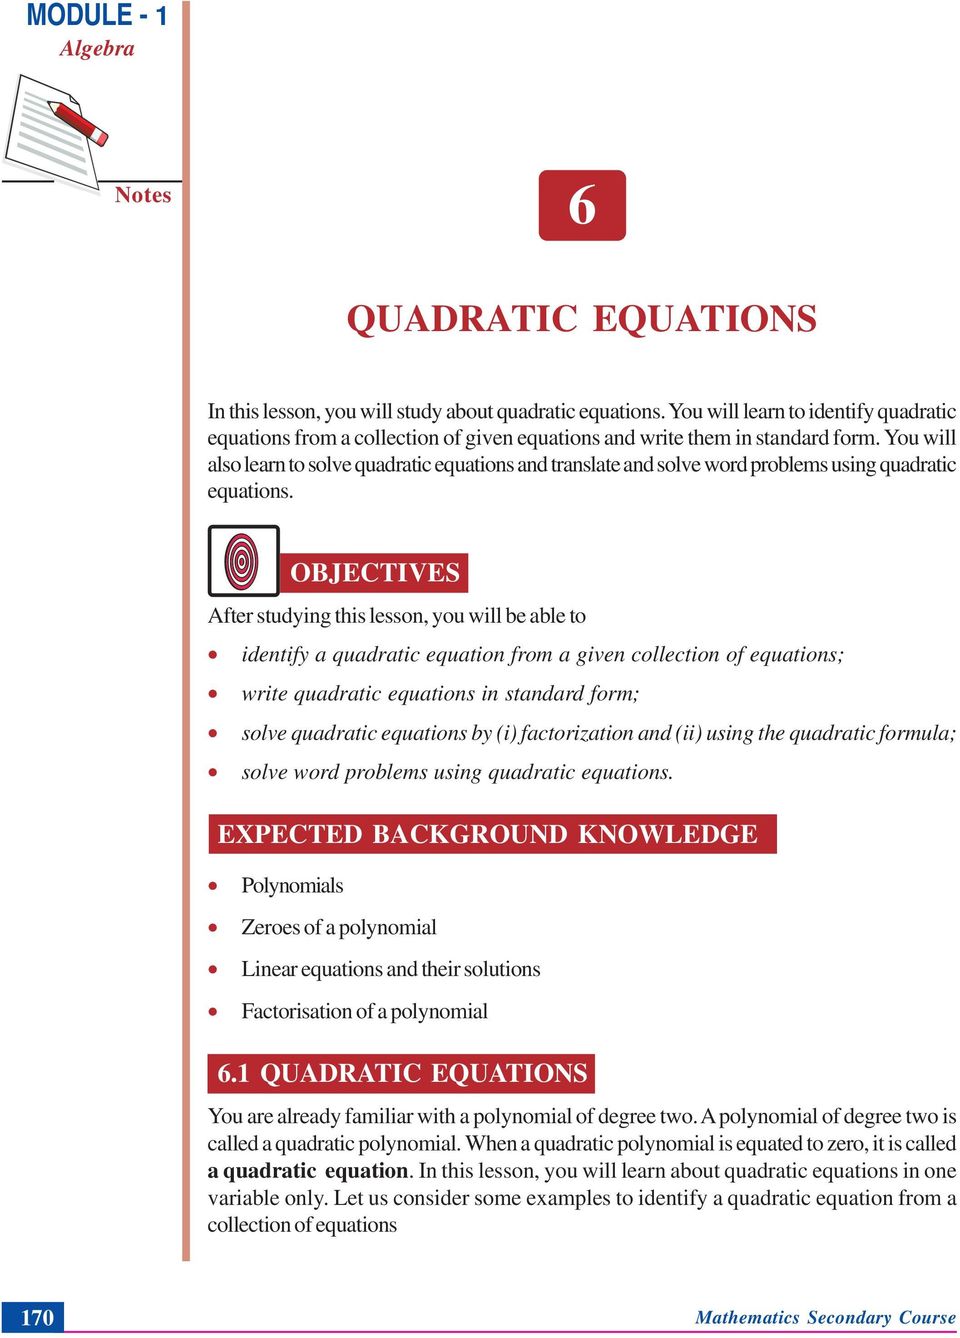 You will also learn to solve quadratic equations and translate and solve word prolems using quadratic equations.